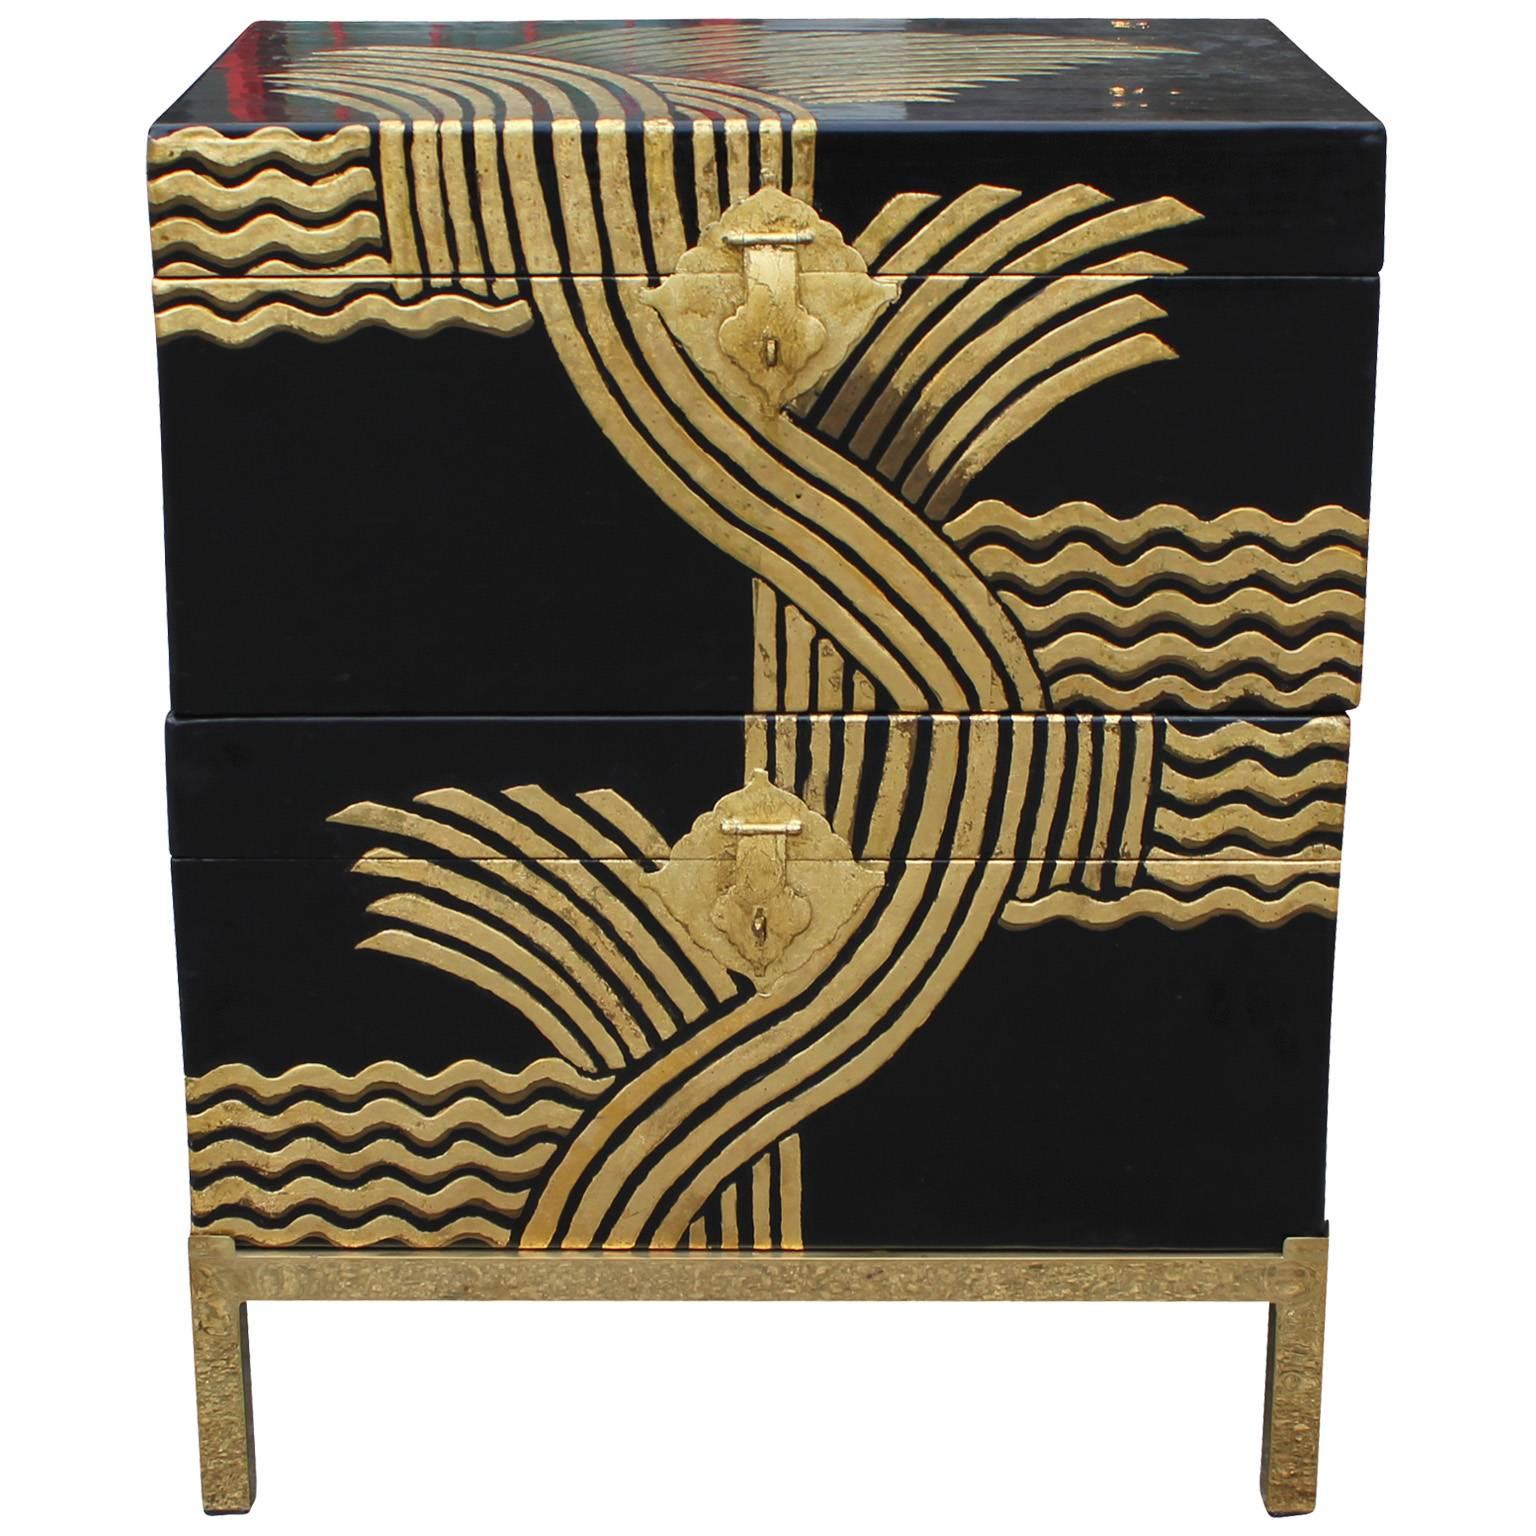 Stacked Asian Black Lacquer and Gold Stacked Chests